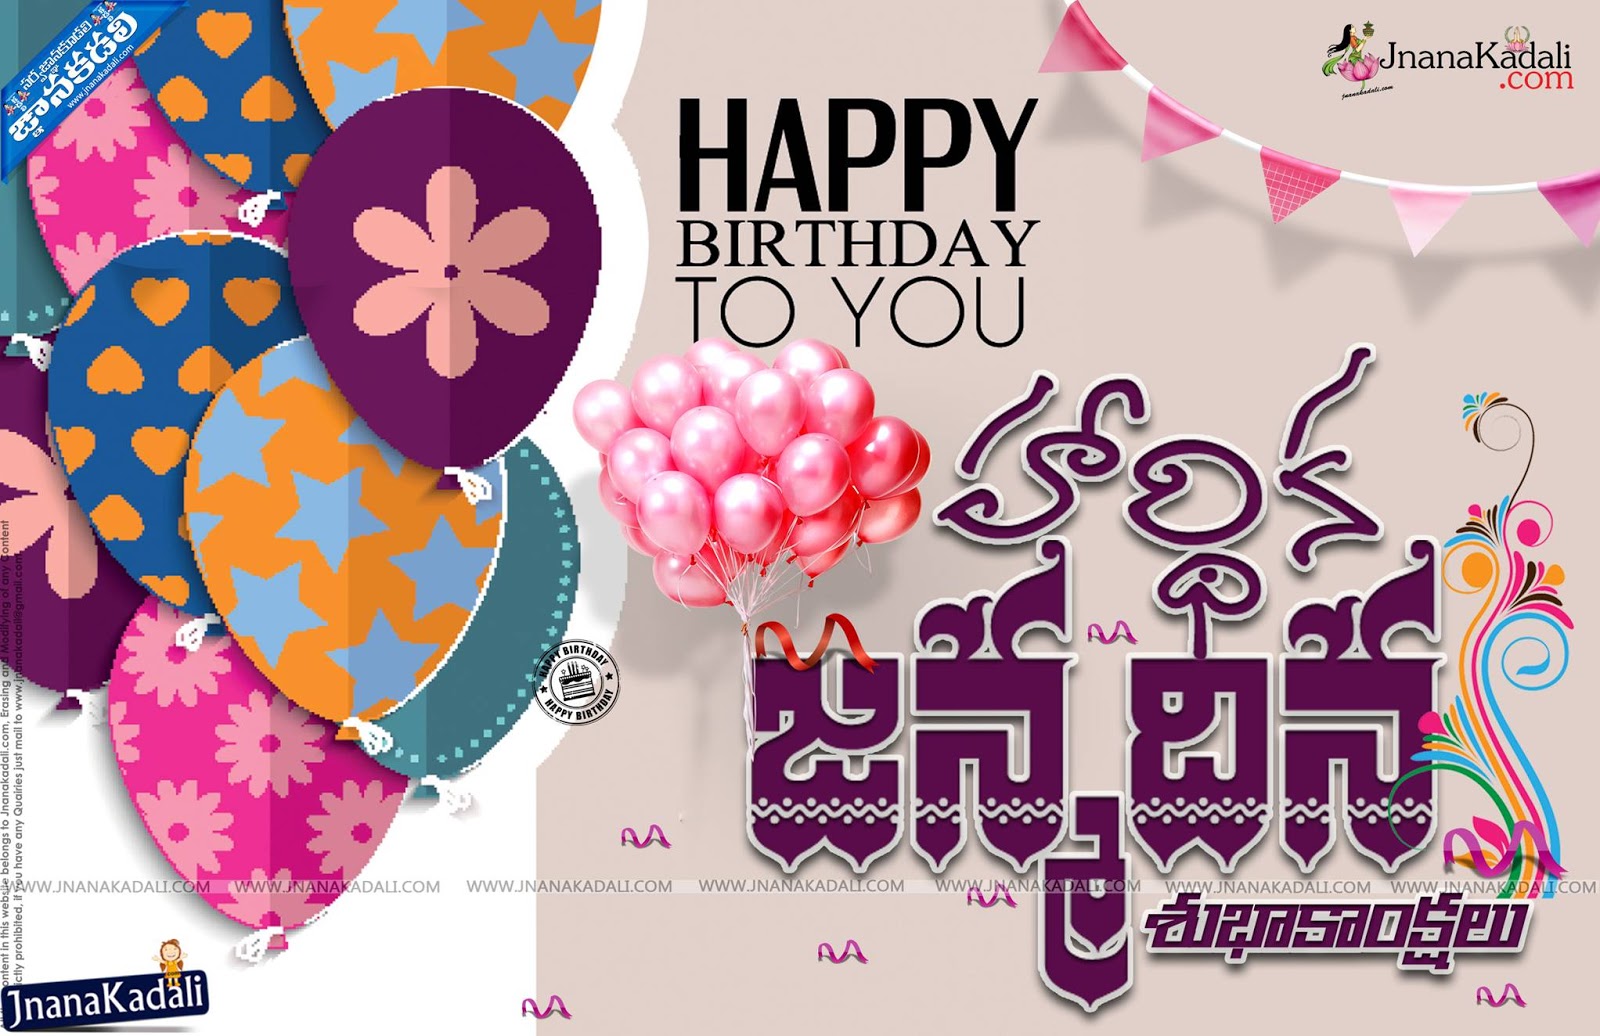 2016 Telugu Happy Birthday Wishes Captions Quotations Wallpapers ...